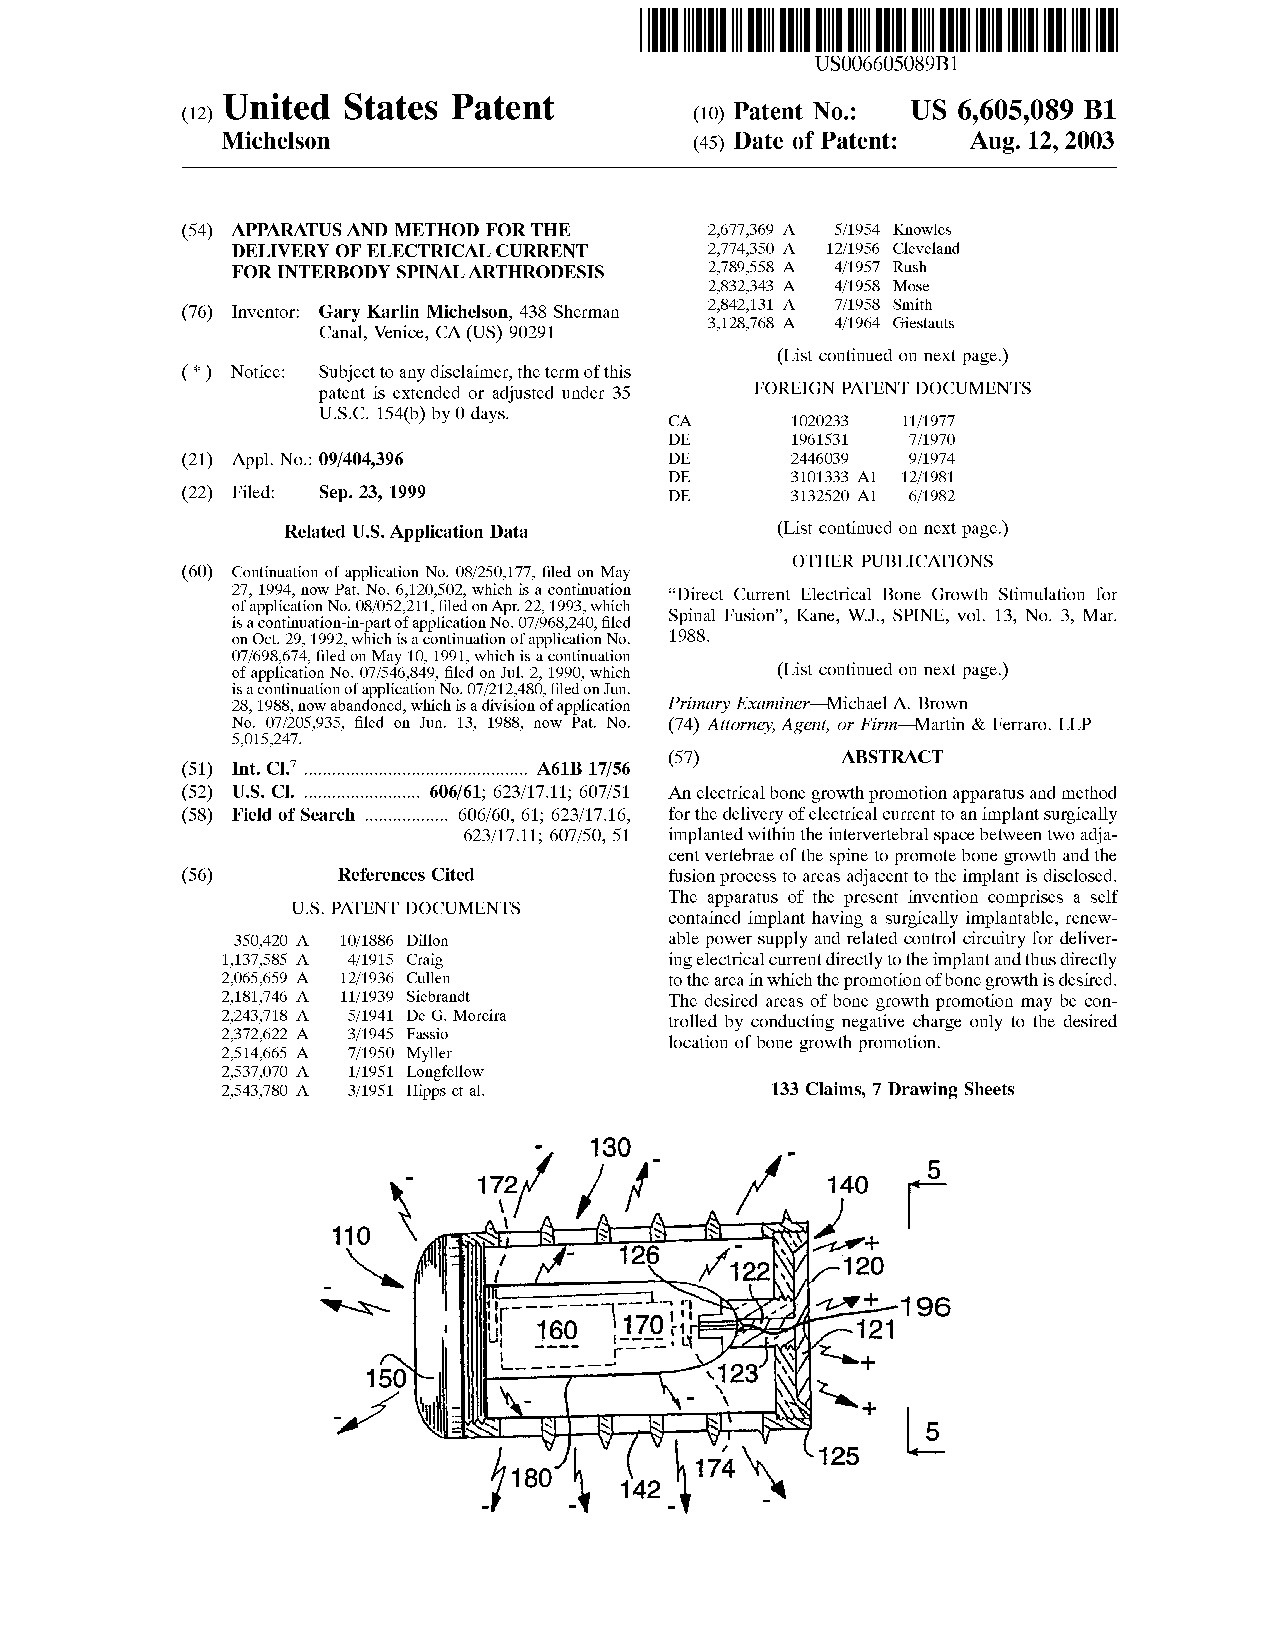 Apparatus and method for the delivery of electrical current for interbody     spinal arthrodesis - Patent 6,605,089